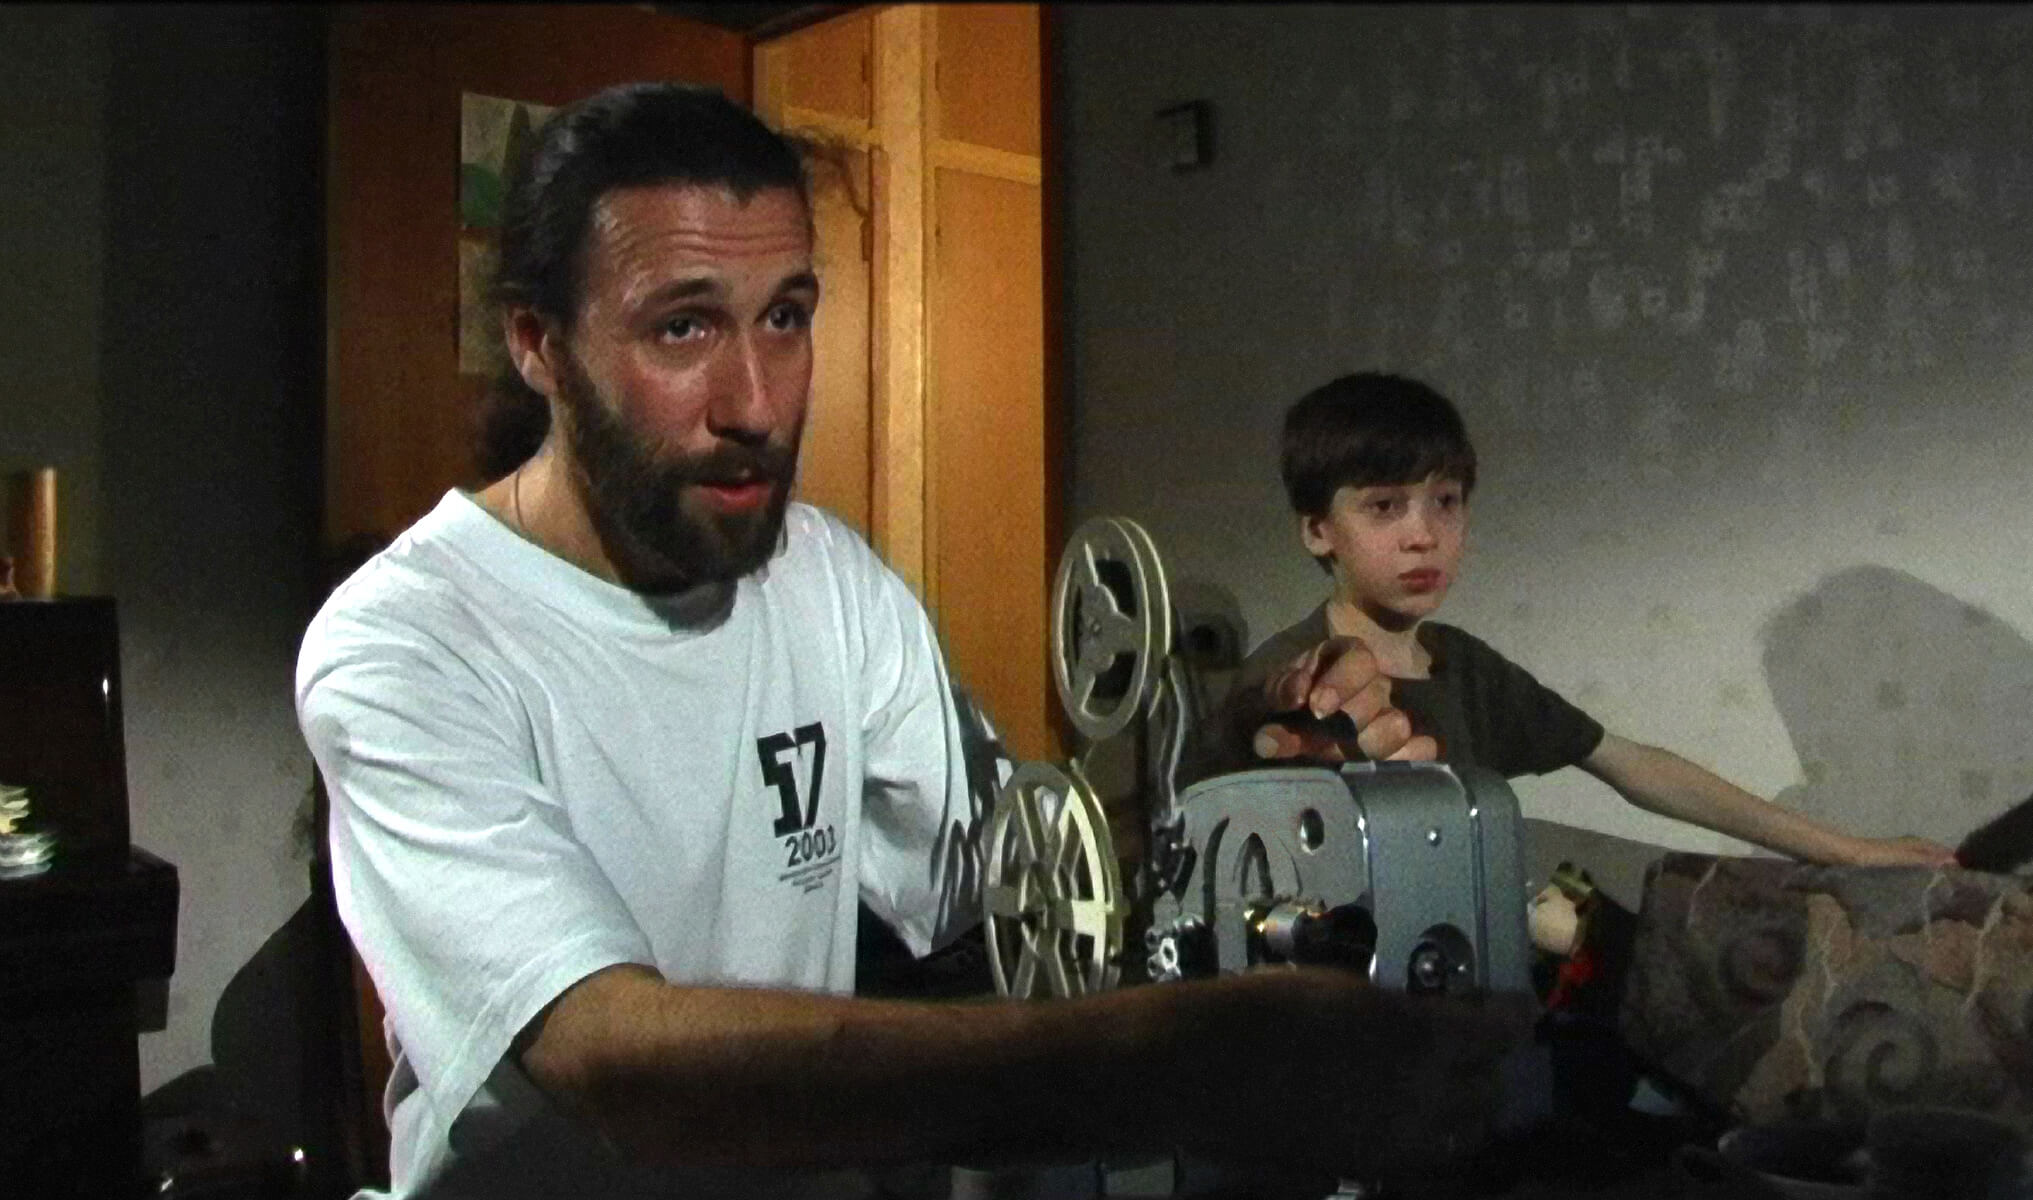 Still from My Perestroika. A man is running an older film projector. A young boy stands beside him.